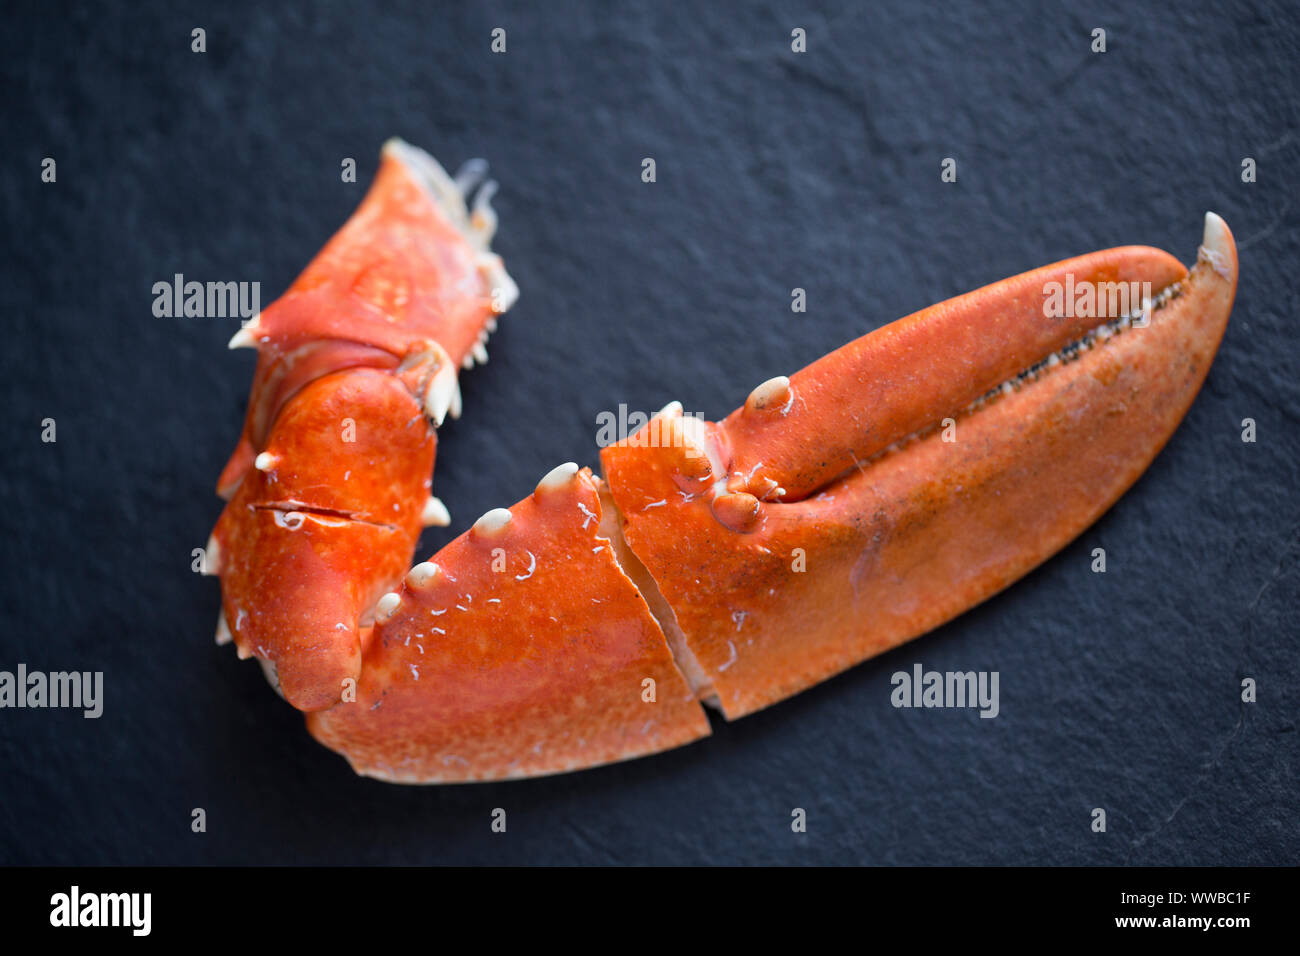 A single, boiled lobster claw from a common lobster, Homarus gammarus, that has been cracked ready for eating. Presented on a dark slate background. E Stock Photo